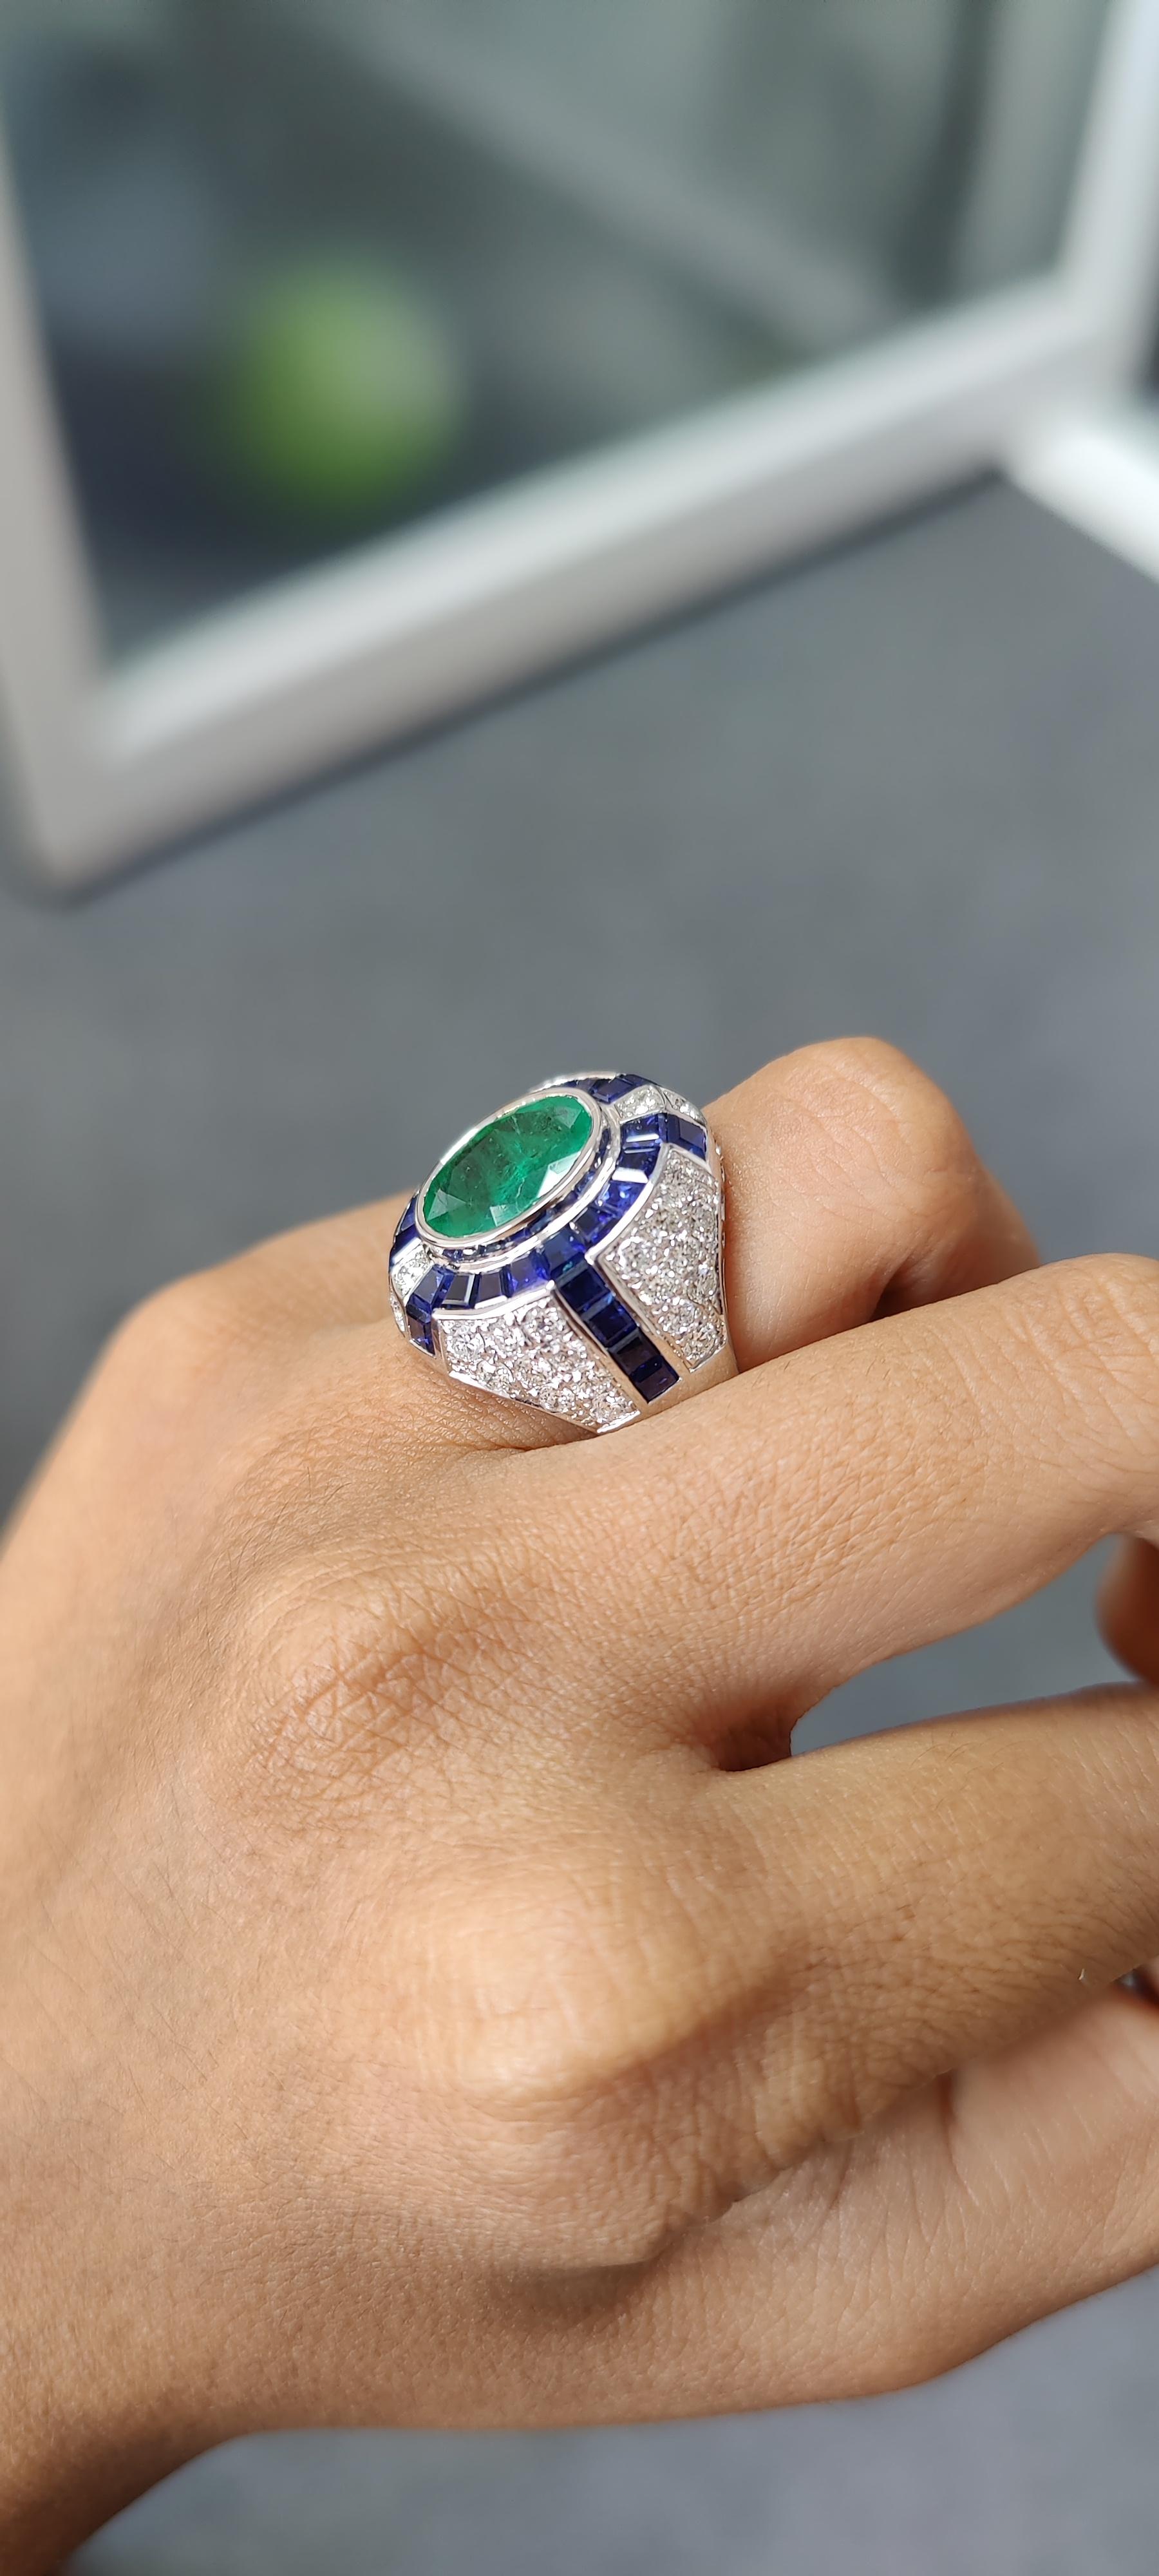 3.29 Carat Art Deco Emerald Ring studded with Blue Sapphires & Diamonds For Sale 1